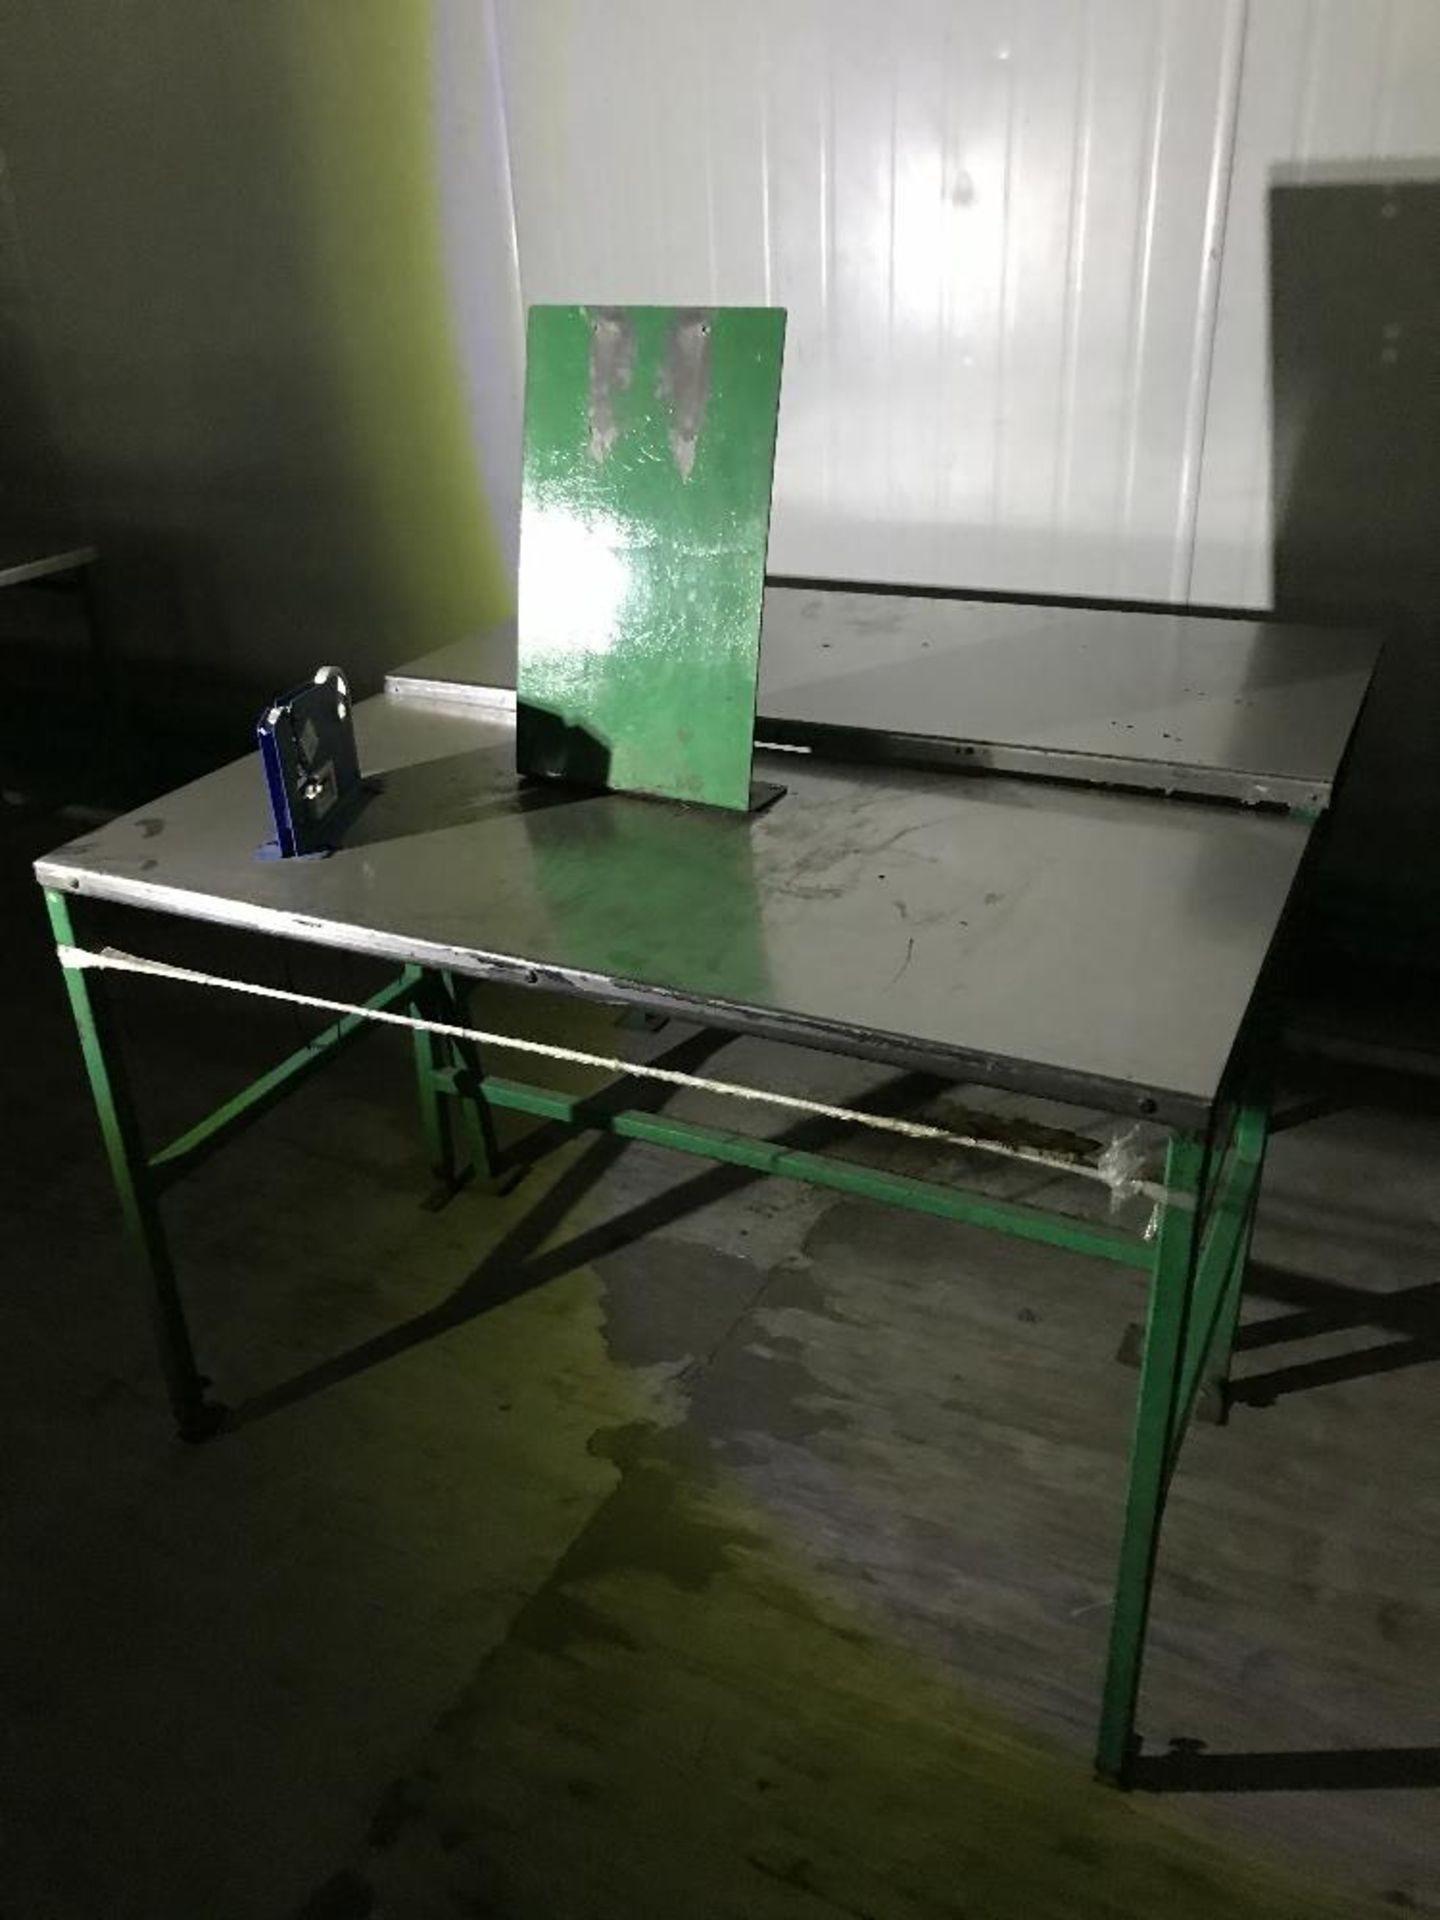 2 x Stainless Steel Tables